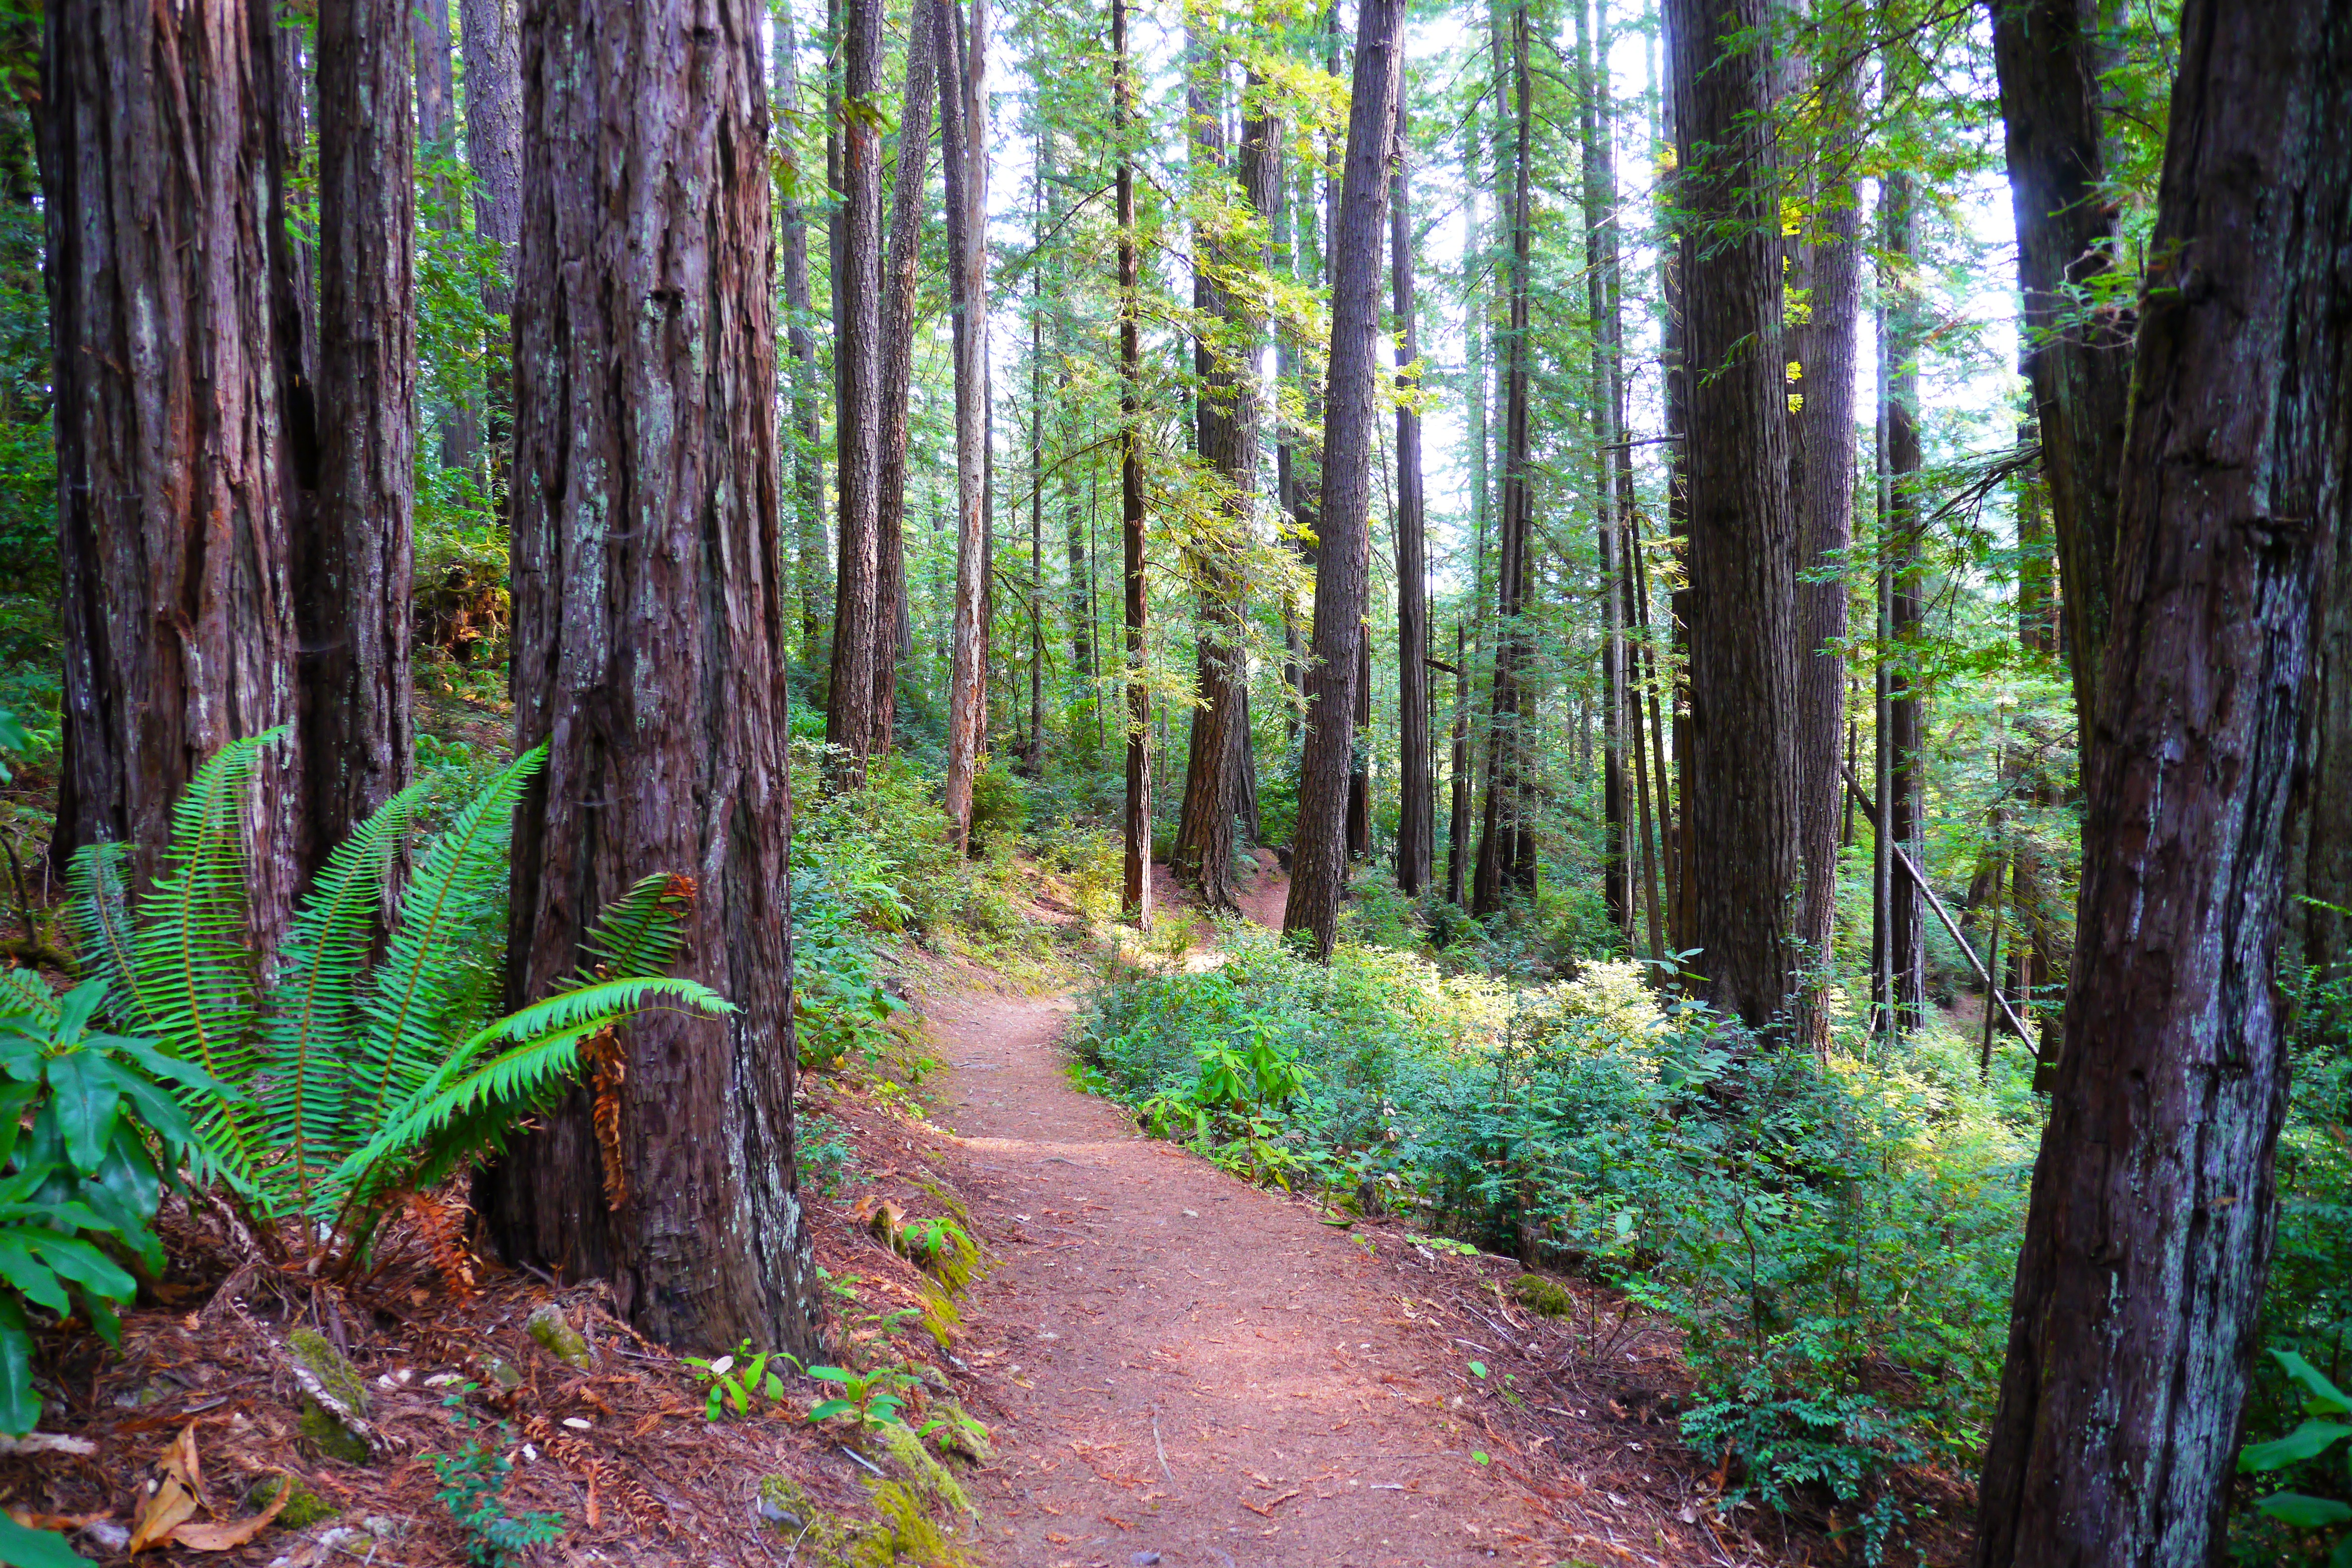 Where to Find the Giant Redwoods of Oregon